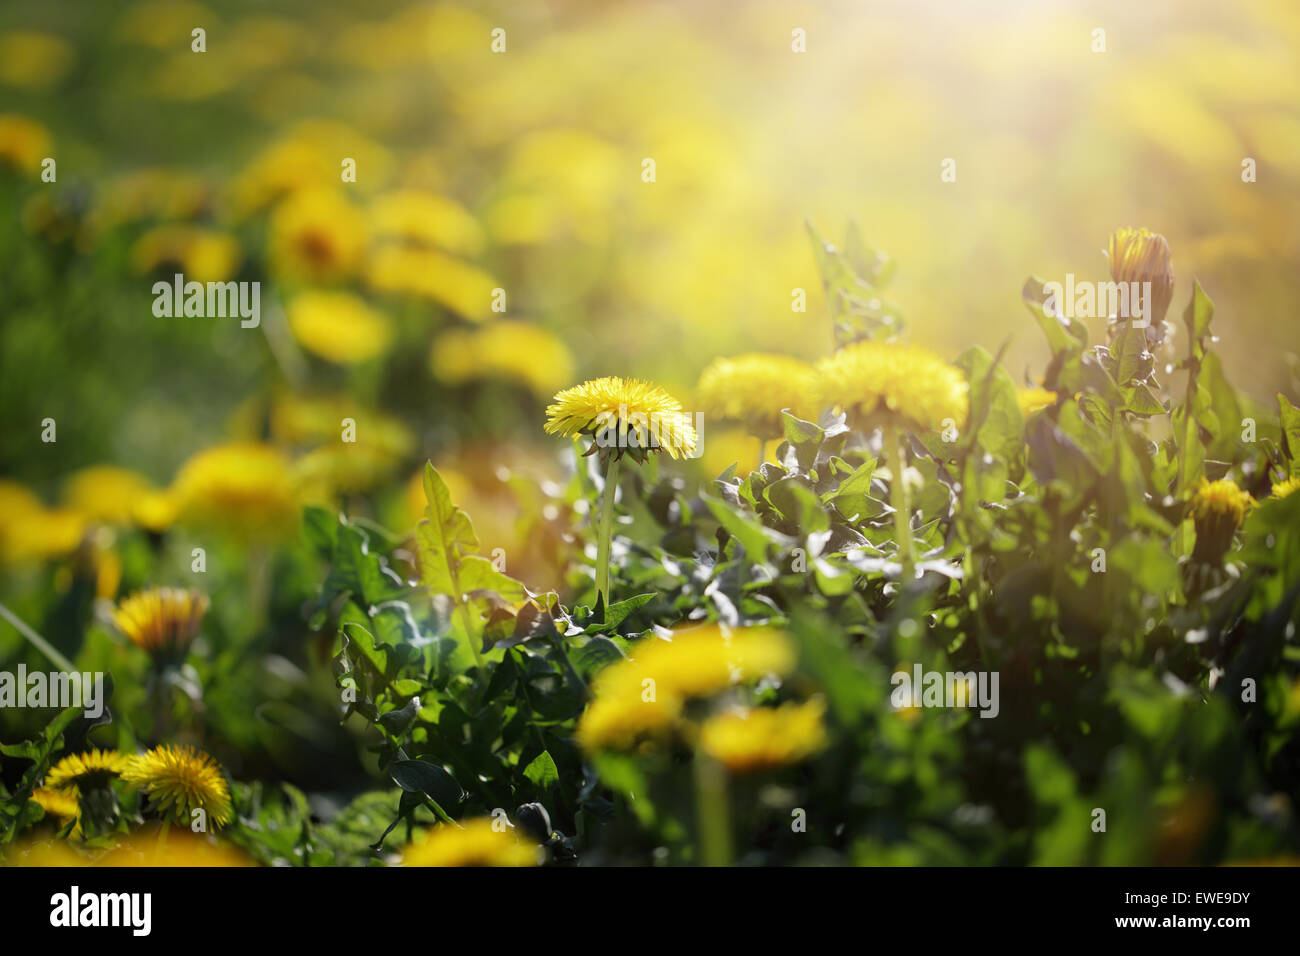 Dandelion flowers in the morning sunlight background concept for spring and summer Stock Photo